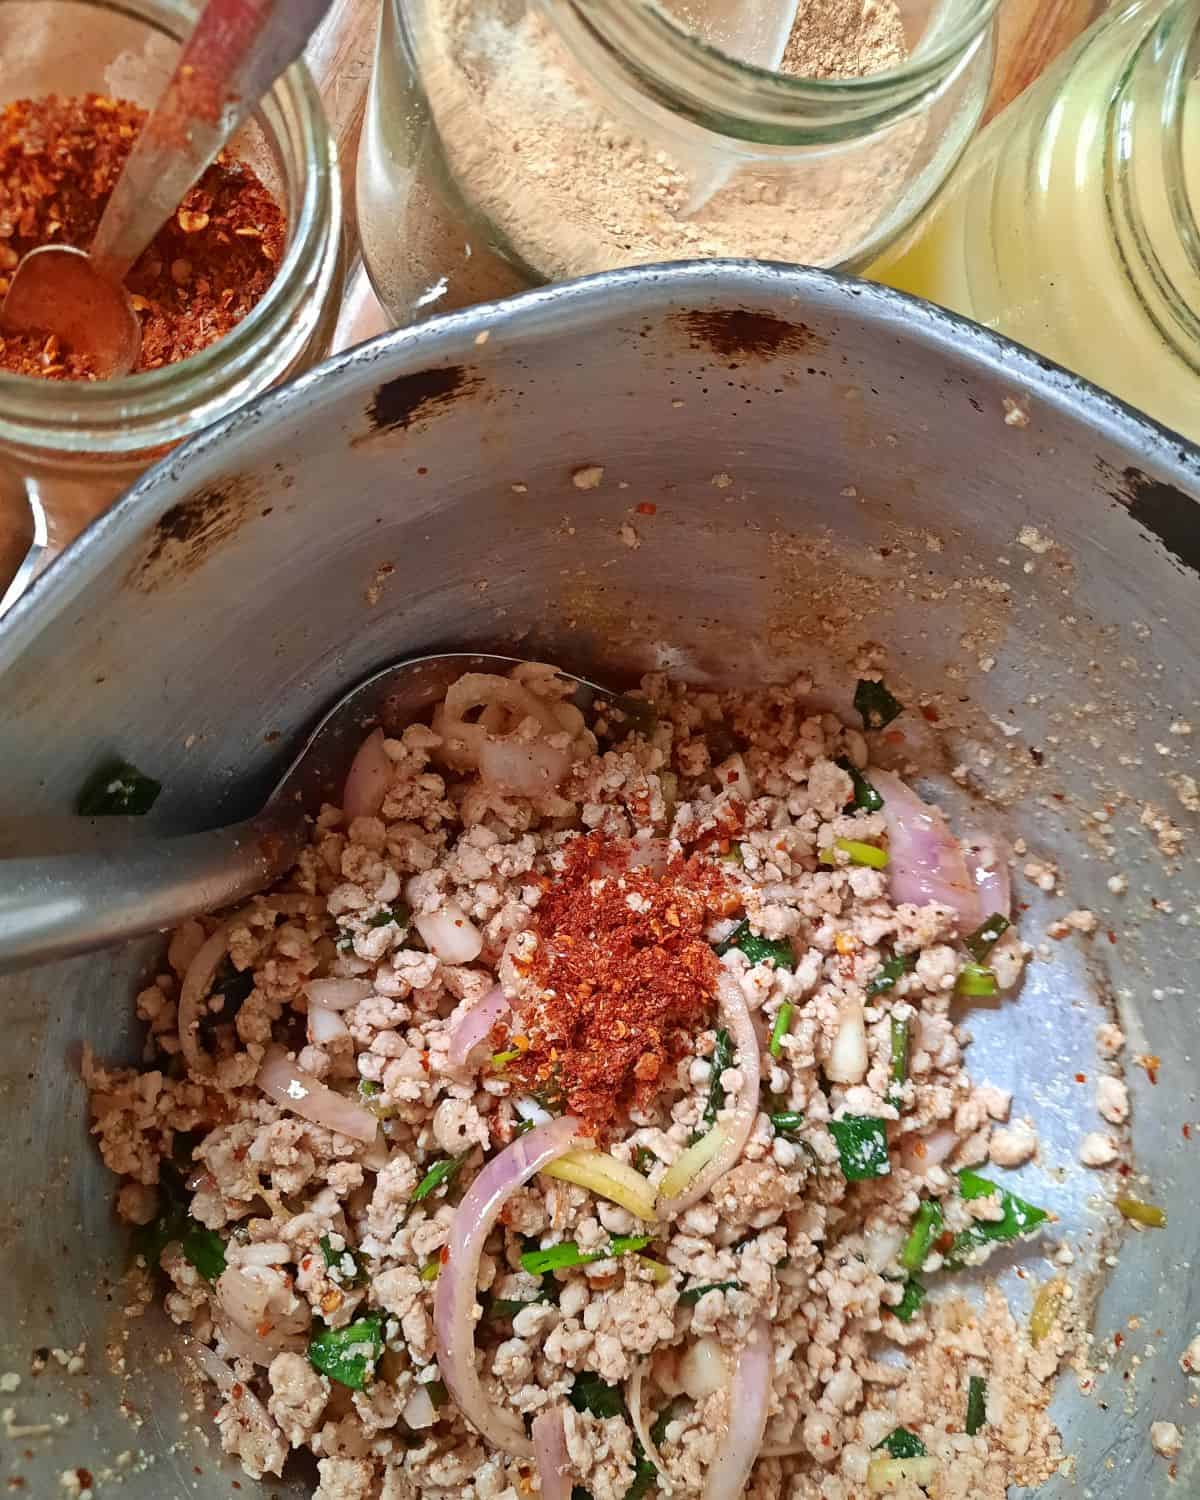 Laab being mixed in a pot